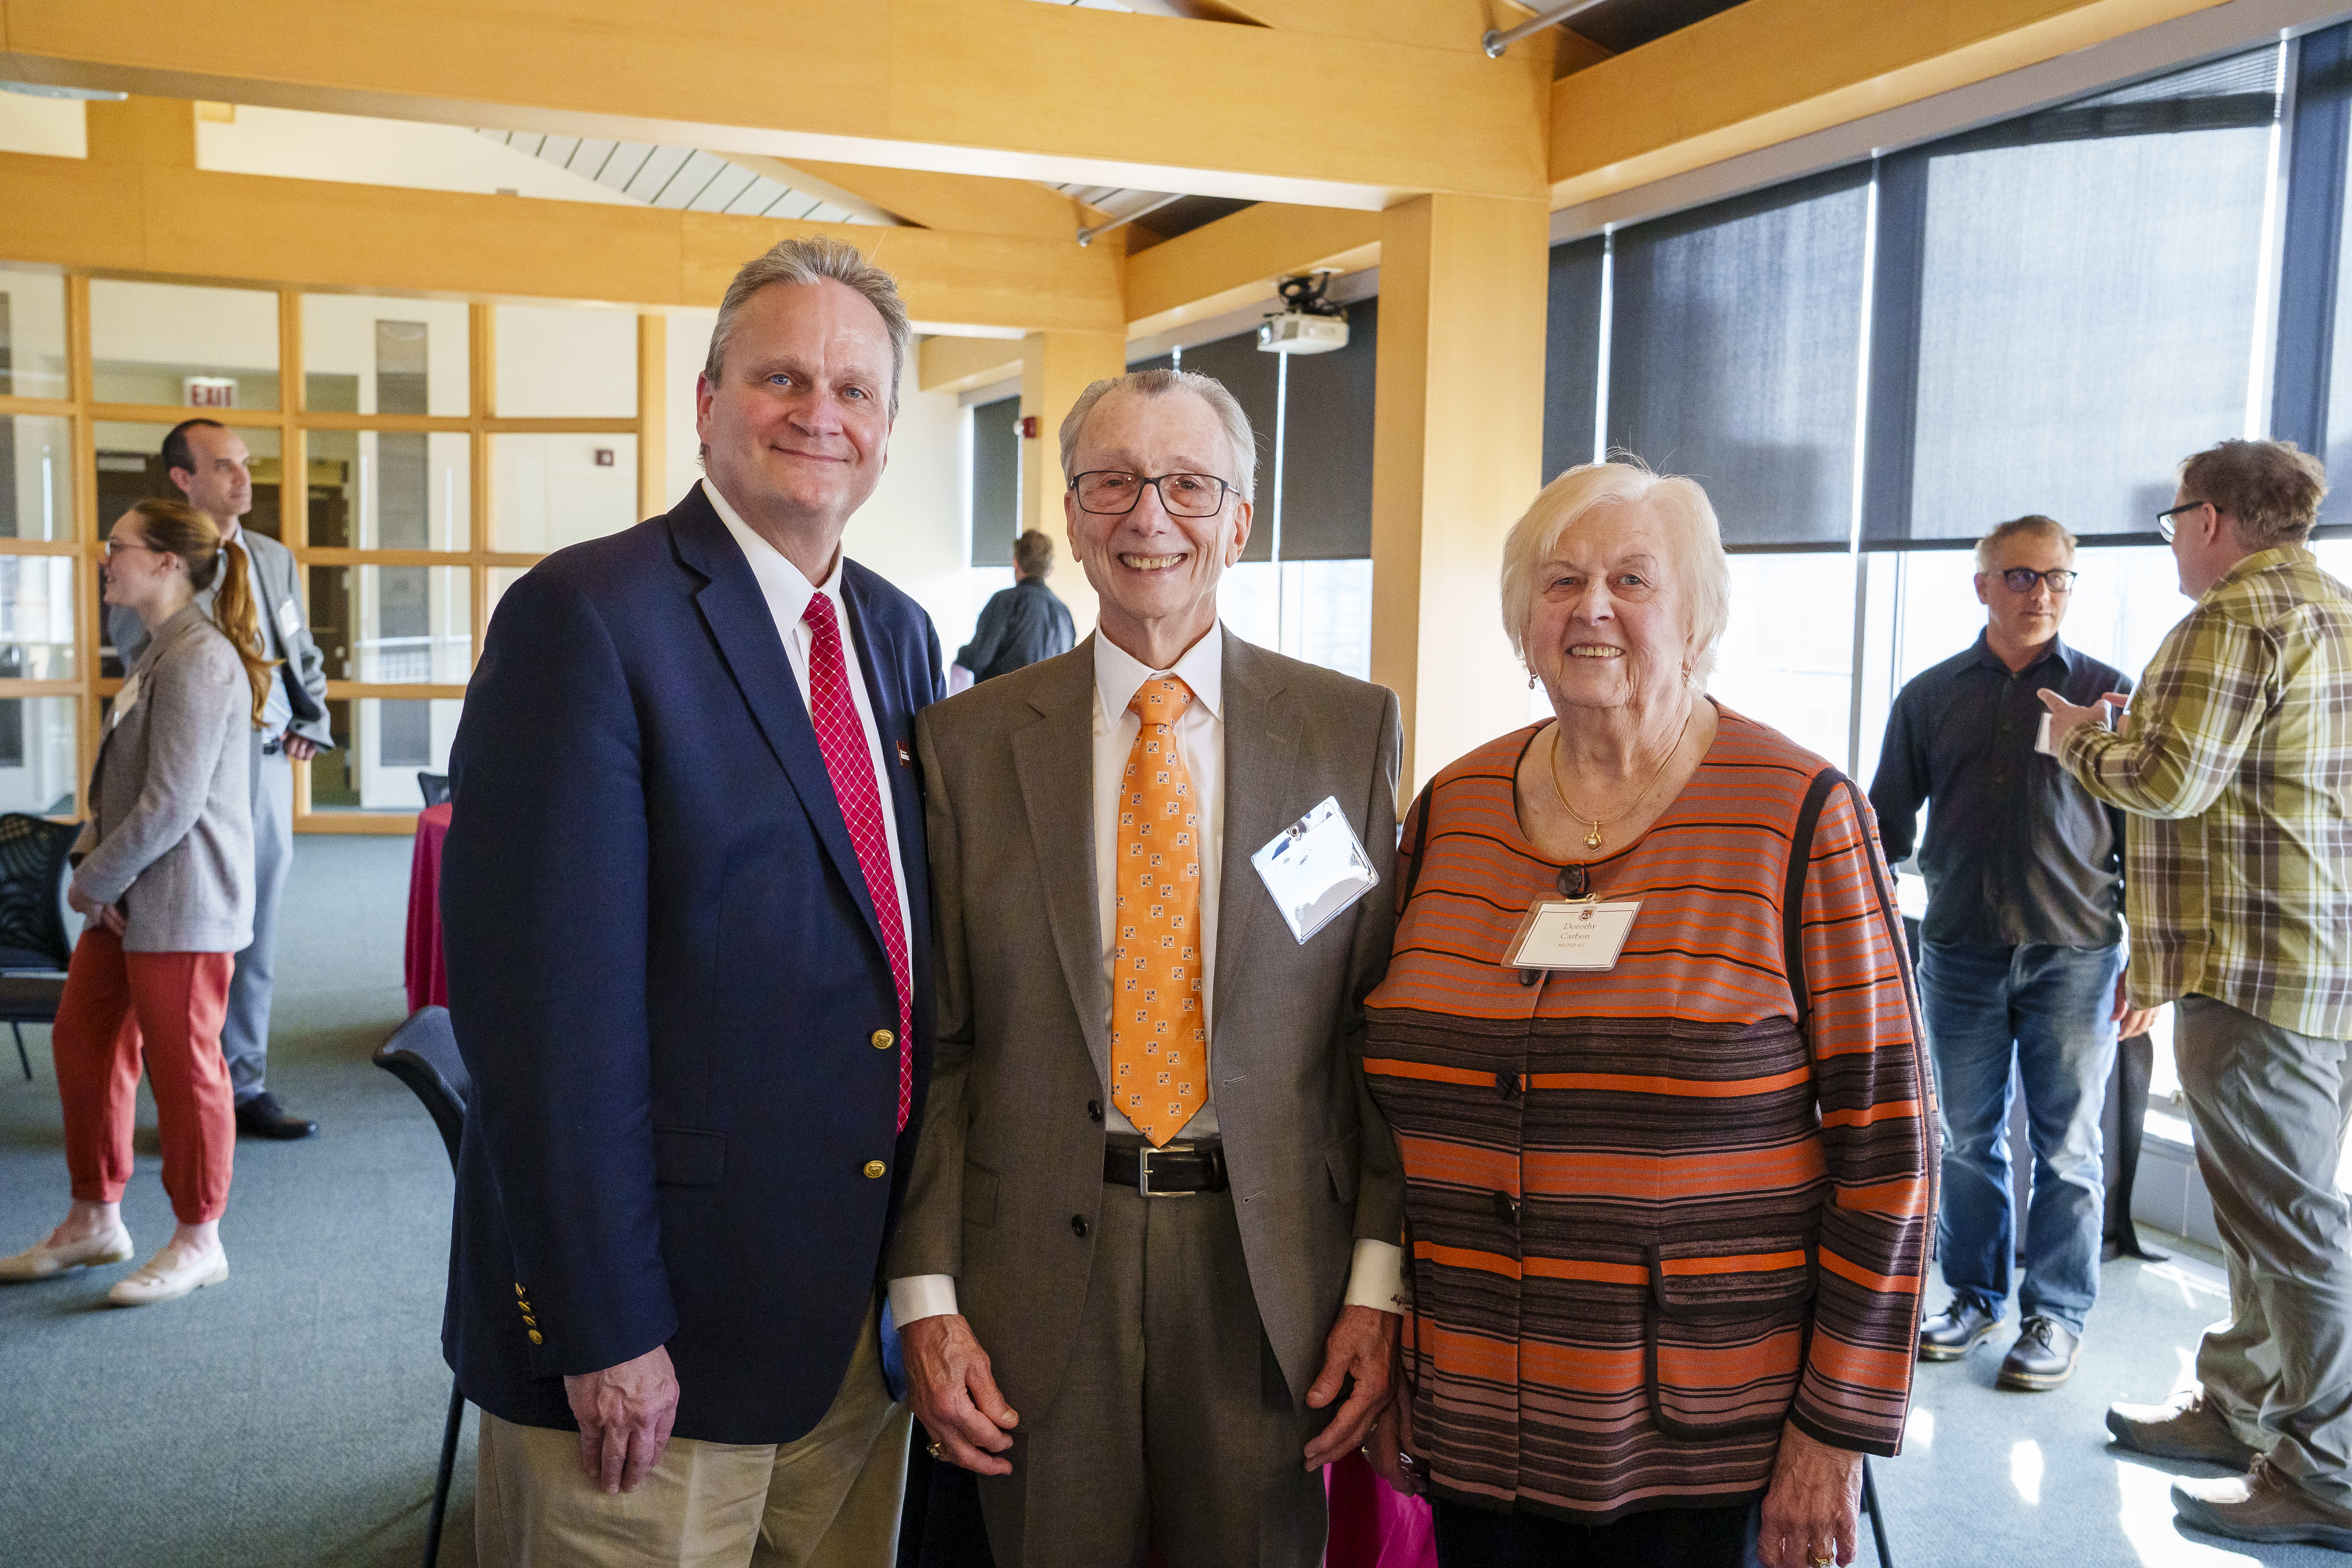 Dr. Michael and Mrs. Dorothy Carbon stand with Dean Schroeder